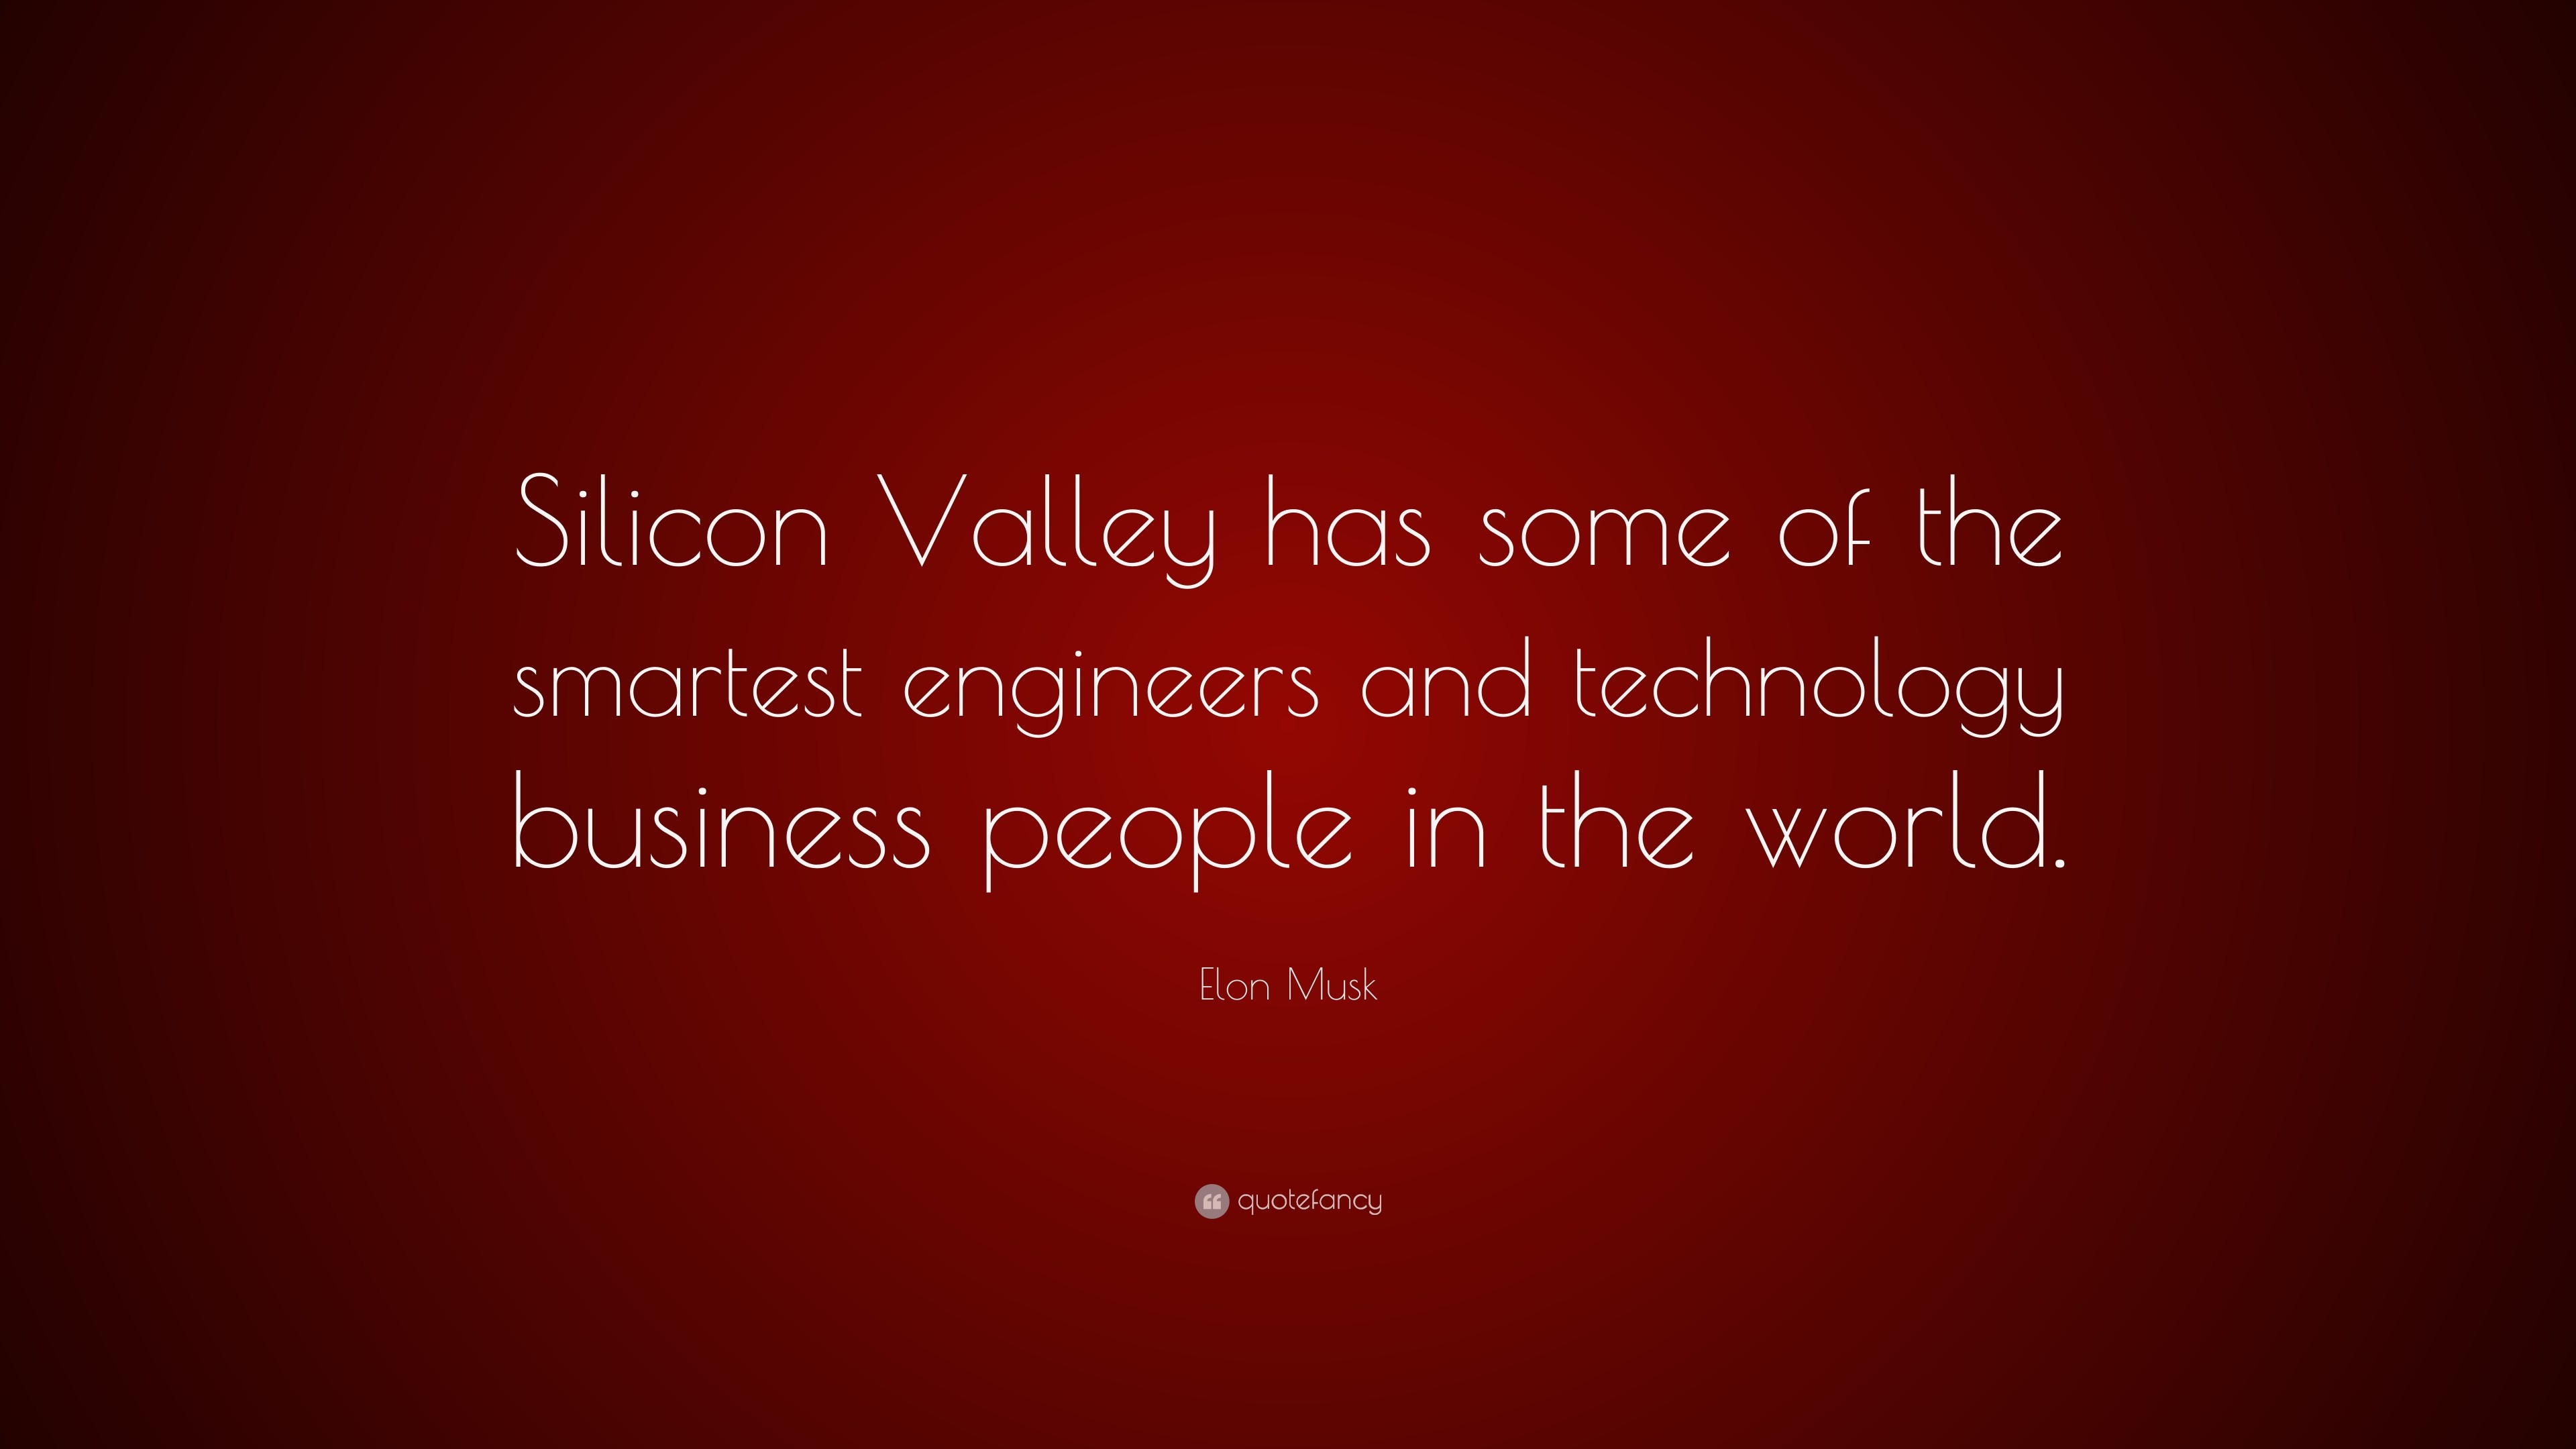 3840x2160 Elon Musk Quote: “Silicon Valley has some of the smartest engineers and  technology business